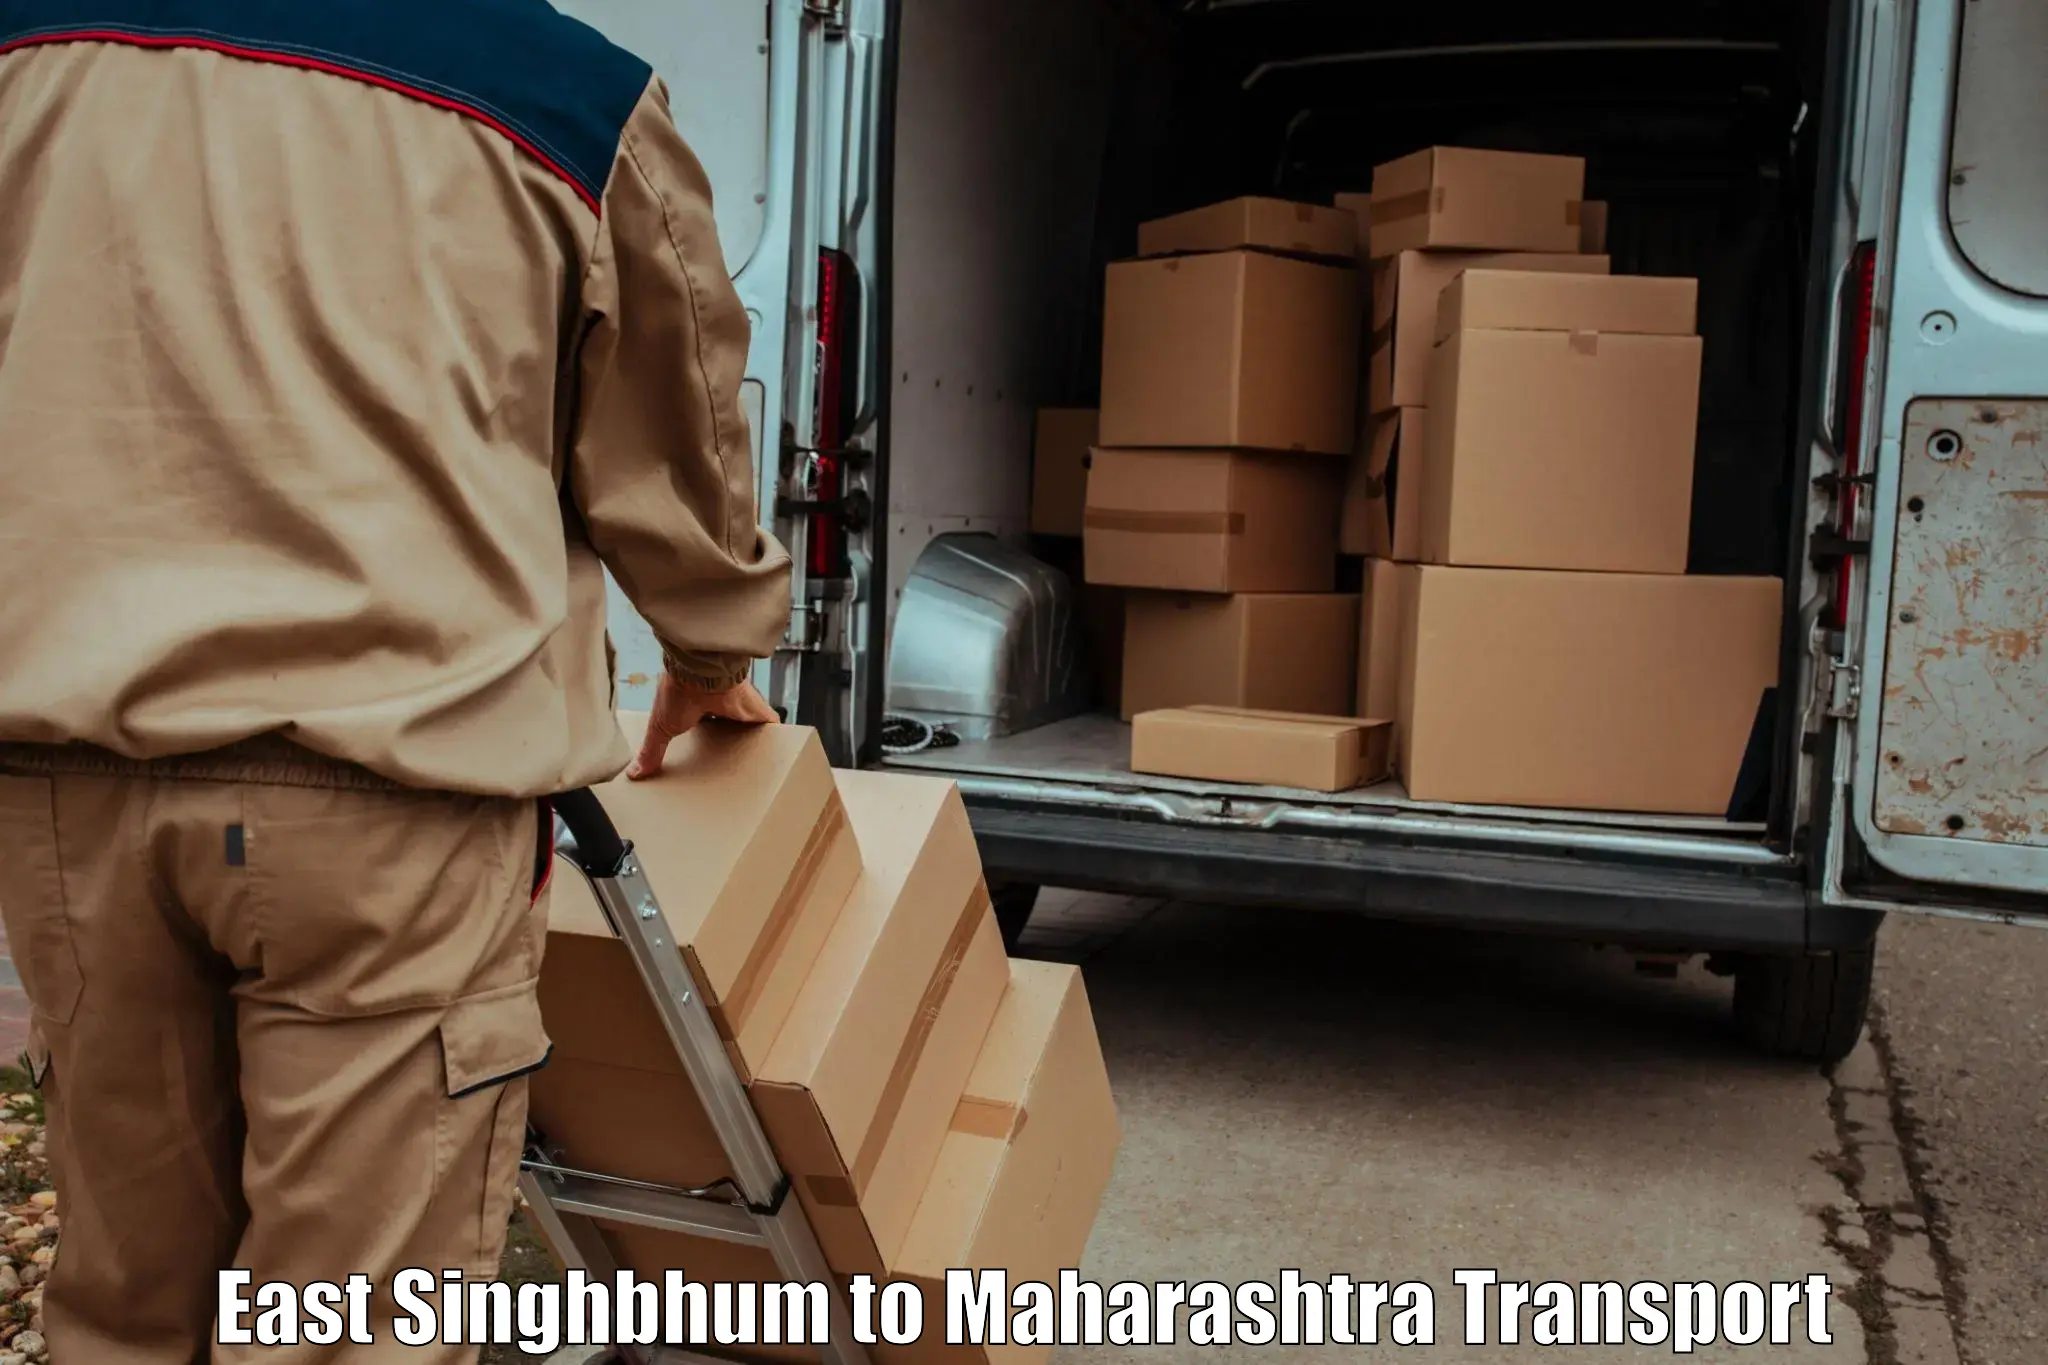 Bike shipping service East Singhbhum to Supe